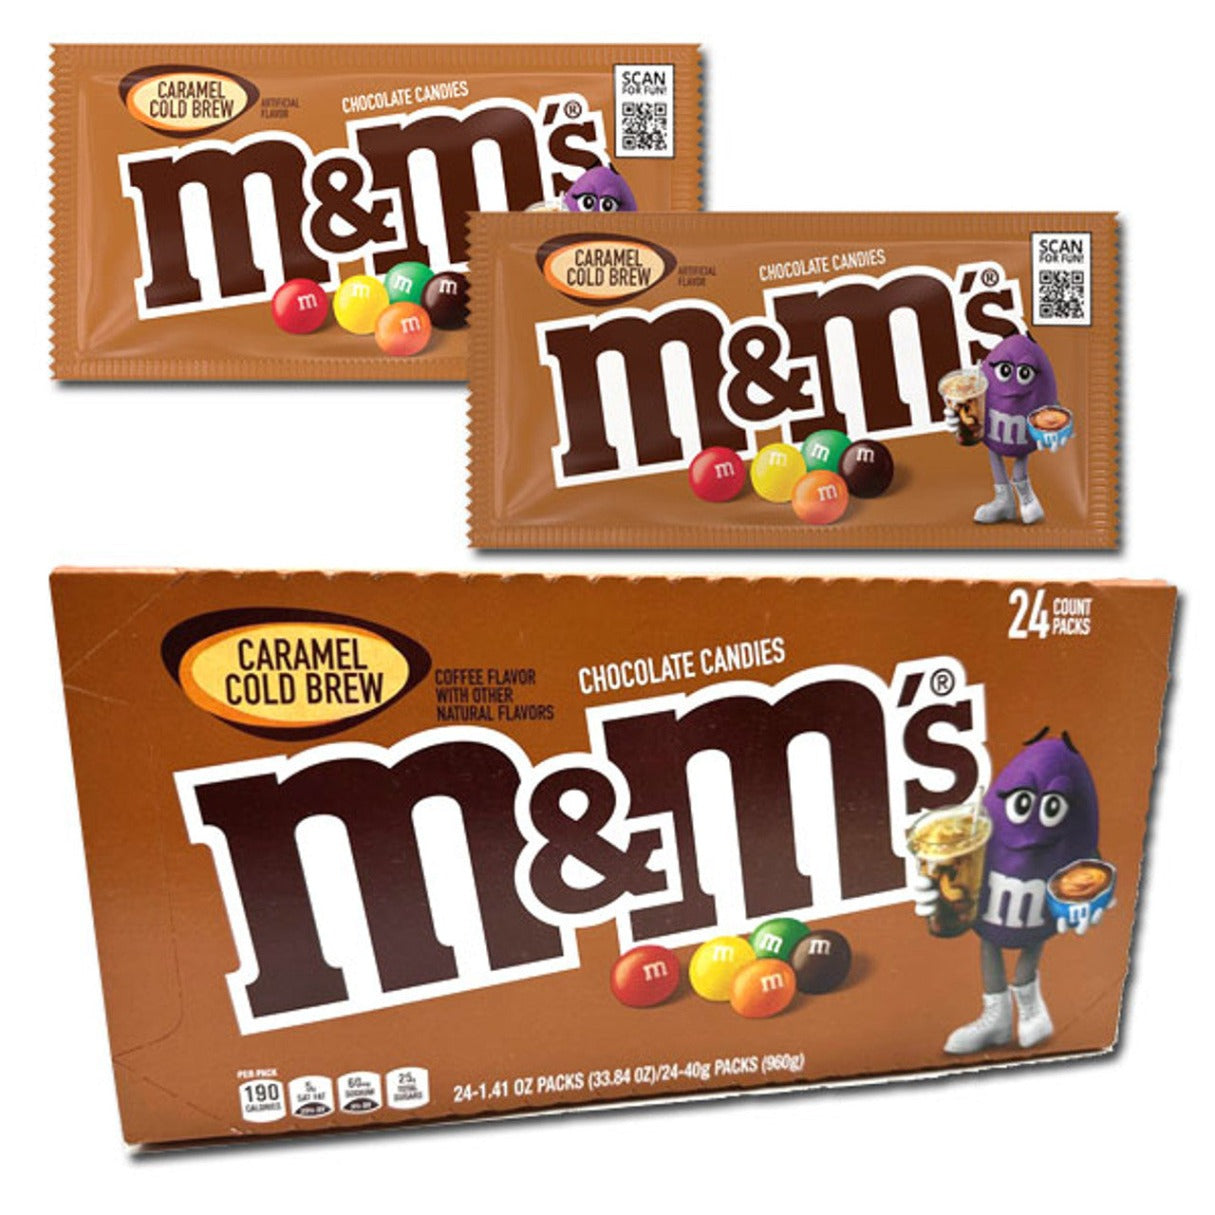 M&M'S Chocolate Candy, Caramel Cold Brew, 1.41 oz, 24 ct